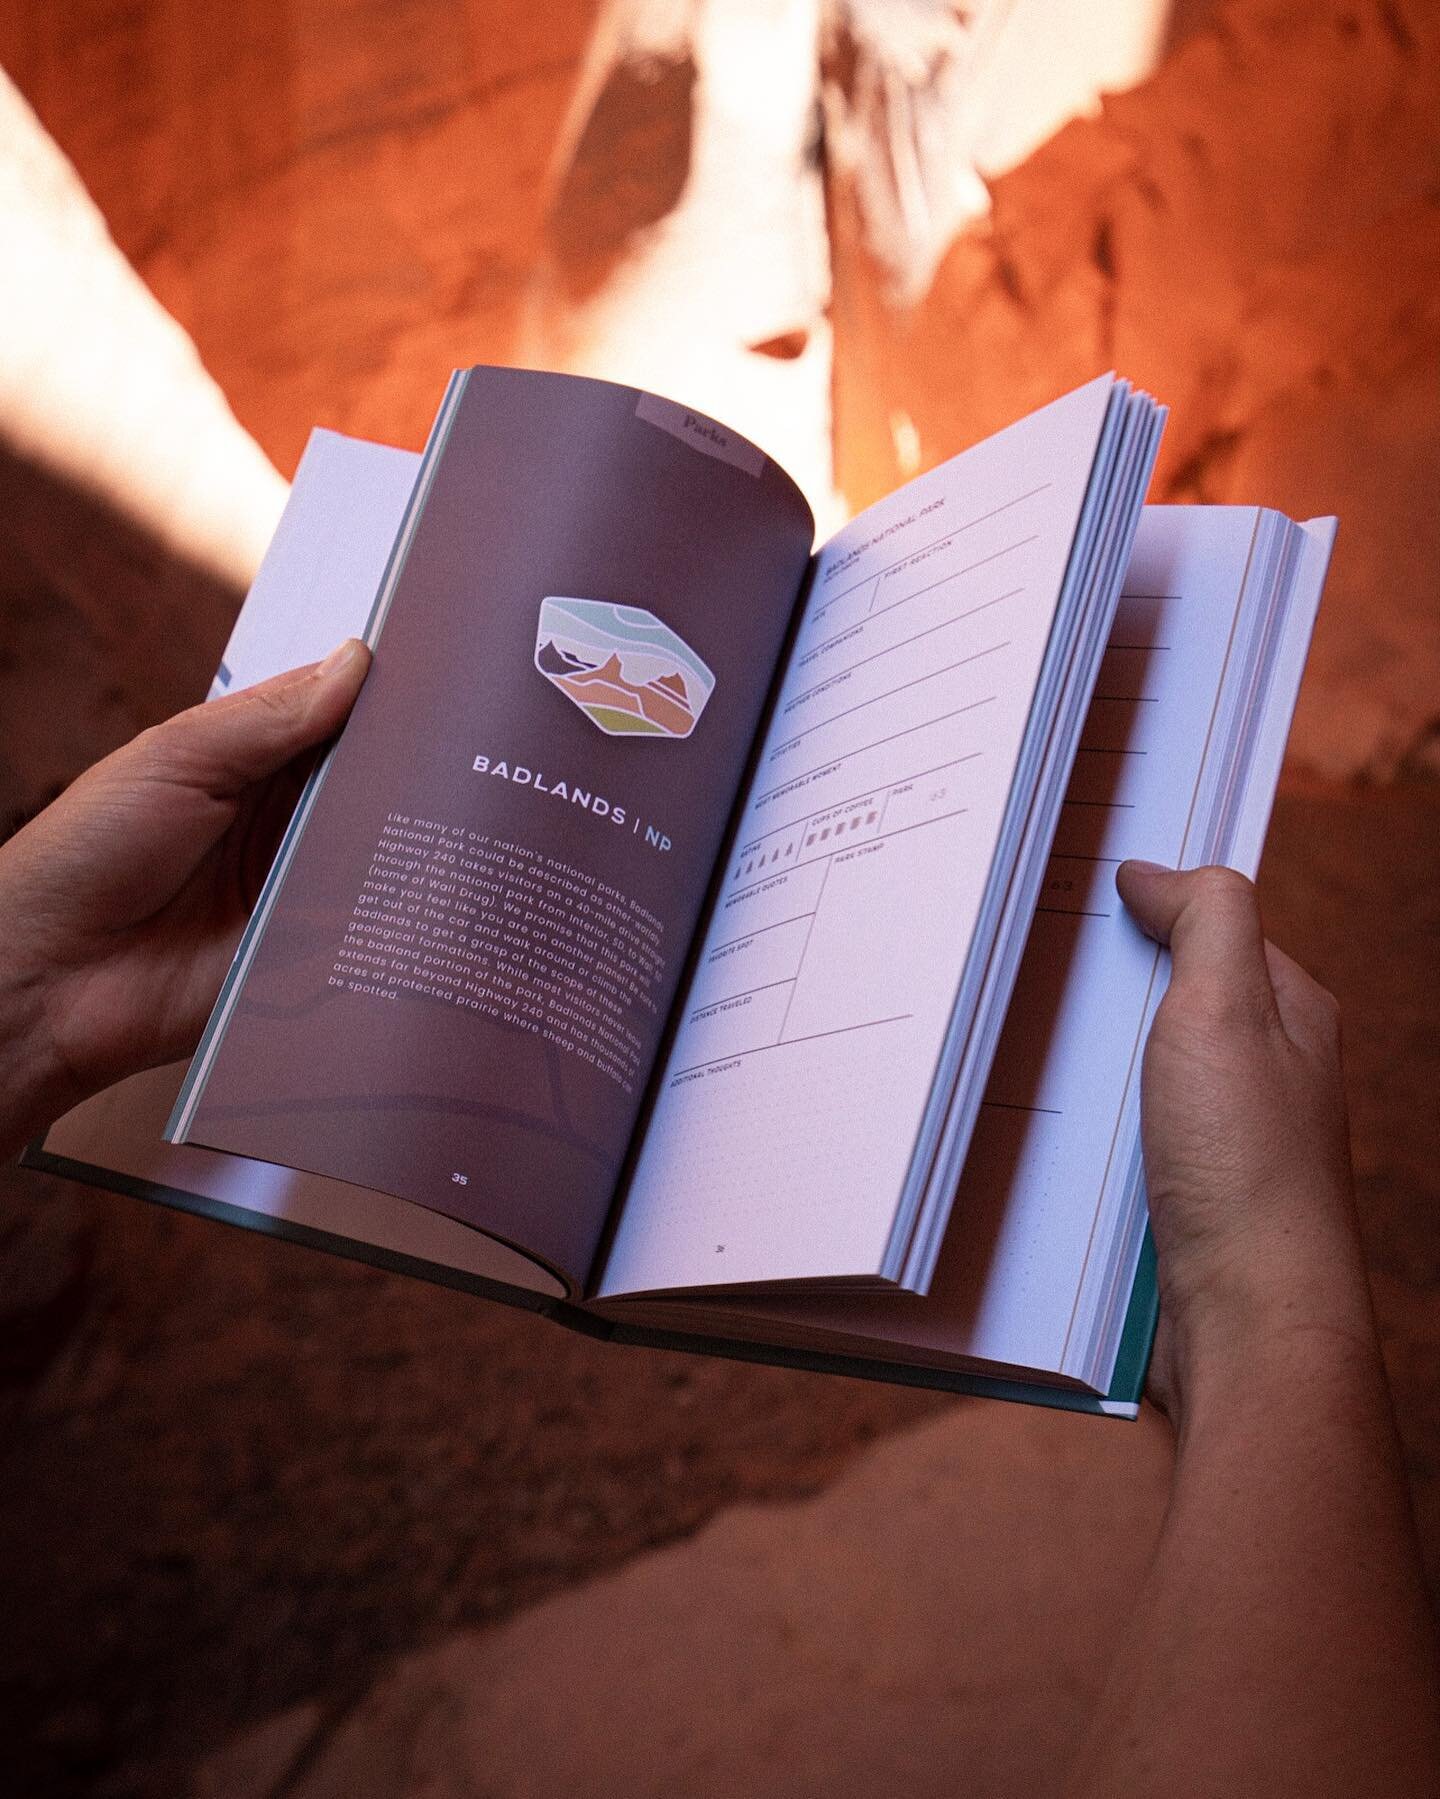 Looking for your next adventure? With Your Passport to the Parks, you can easily learn more about our national parks, plan your visit, and capture your favorite memories along the way.

Our travel journal makes it simple to document your trip and rel